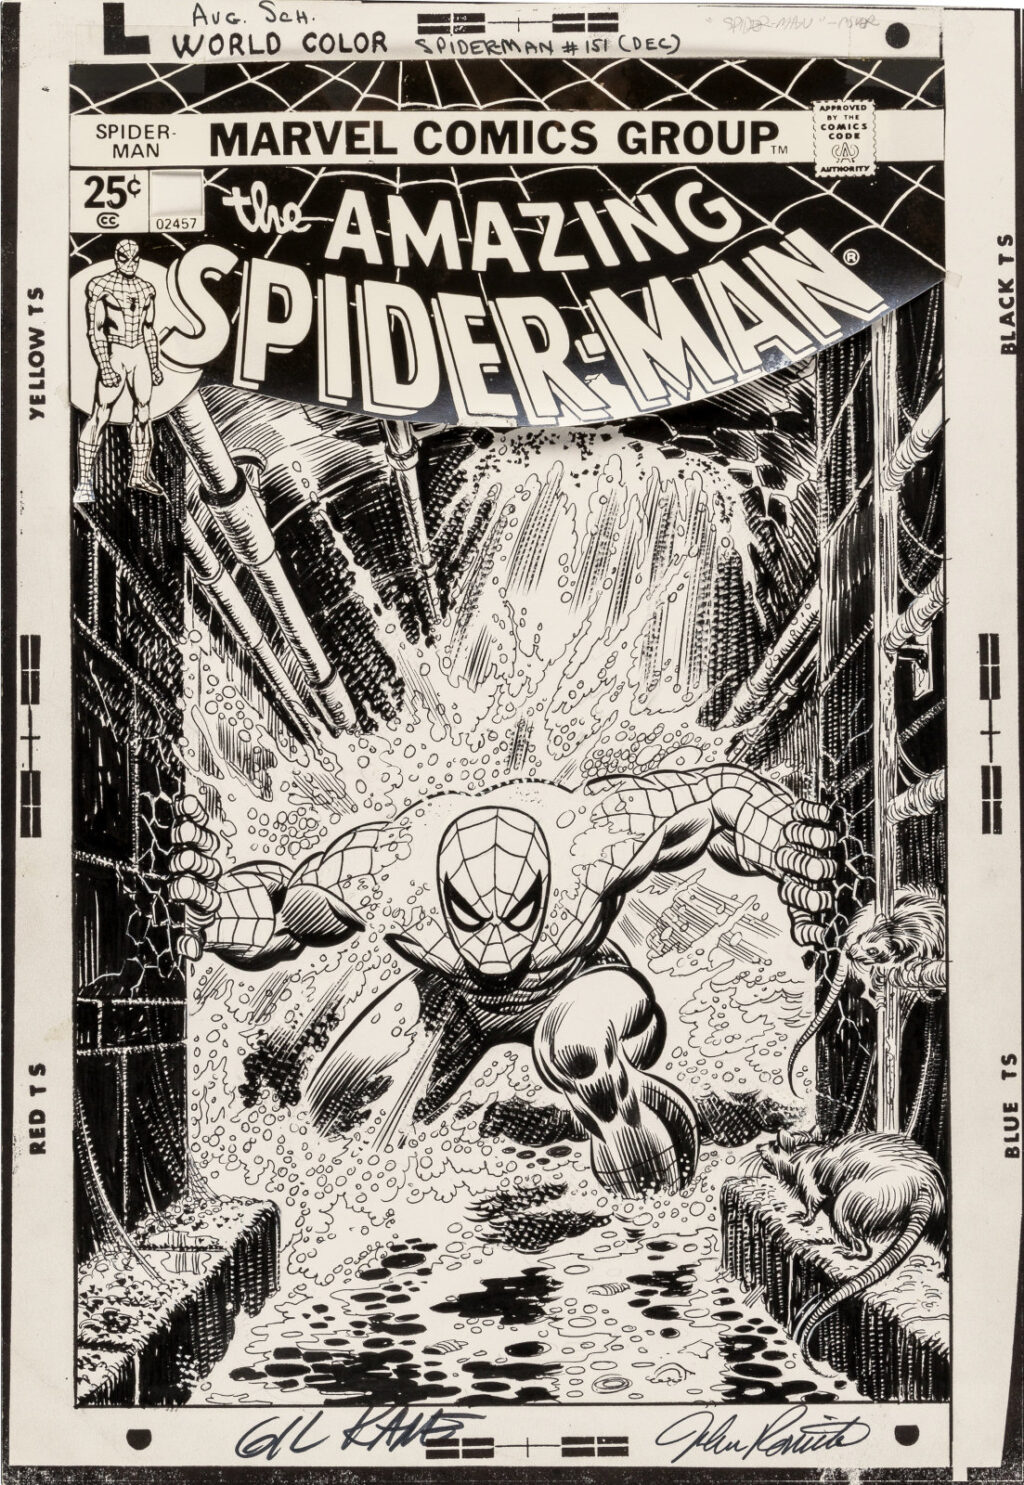 Amazing Spider Man issue 151 cover by Gil Kane and John Romita